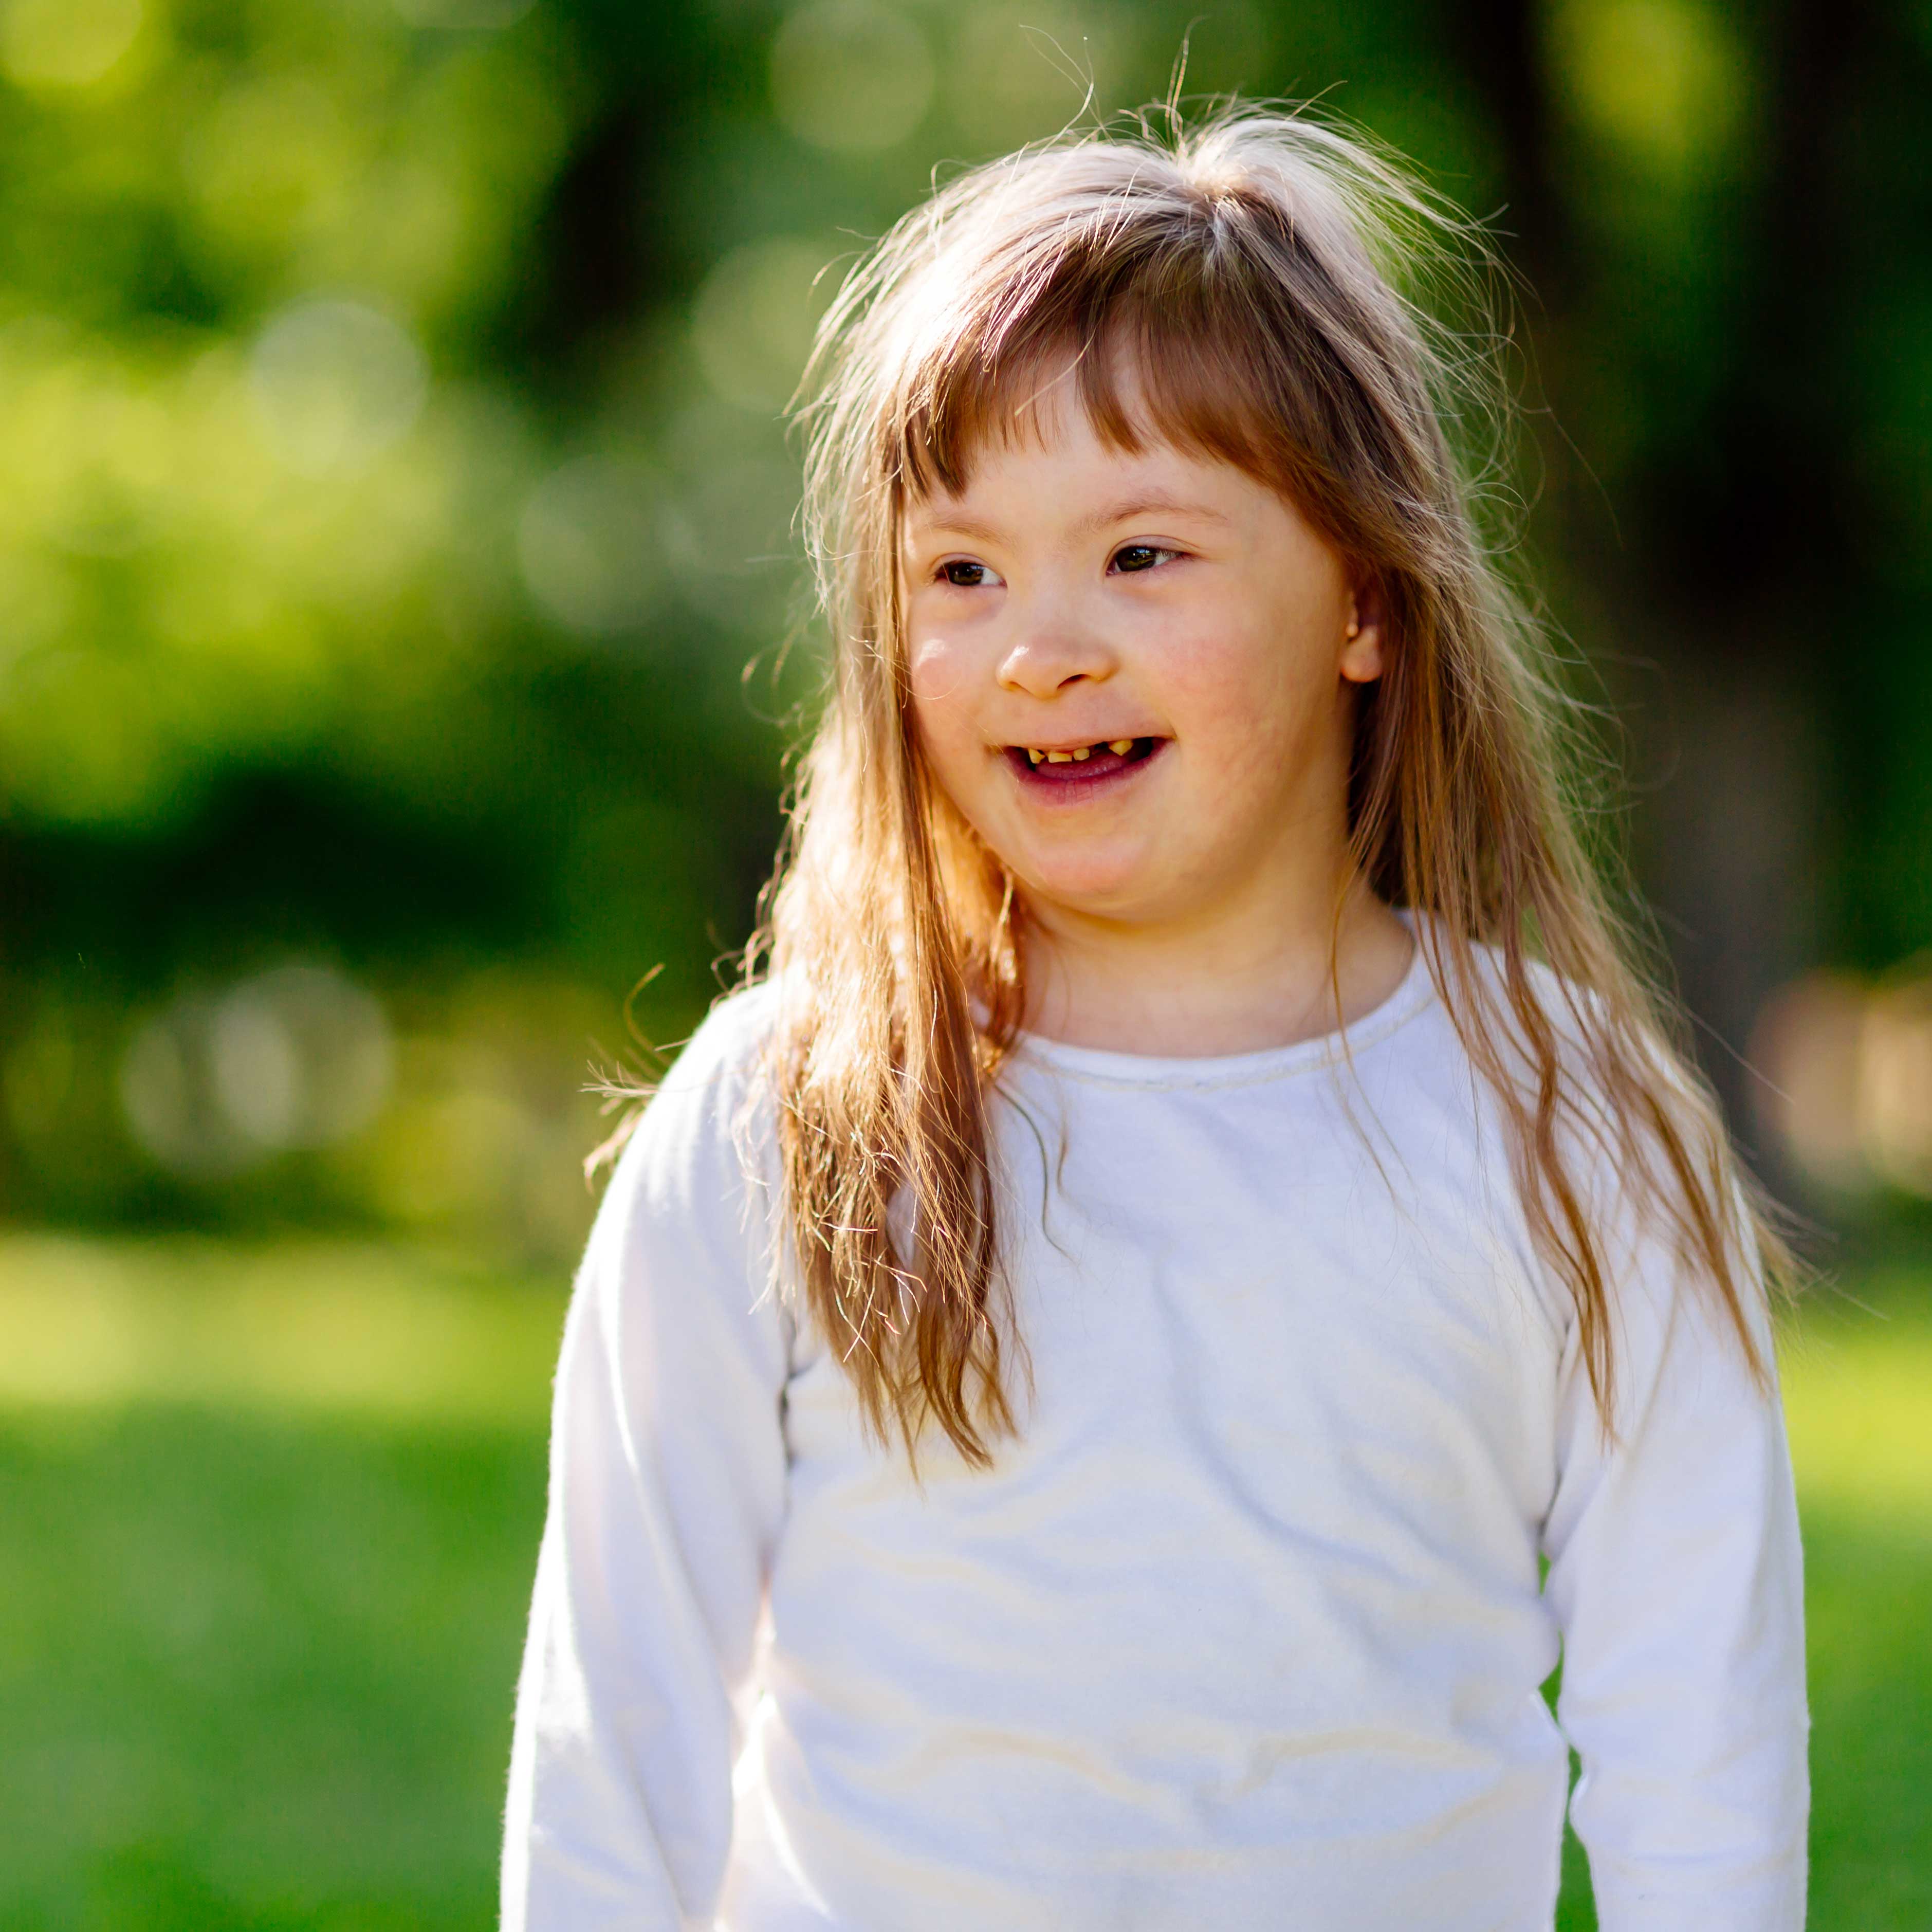 Happy child with down sydrome smiling outdoors